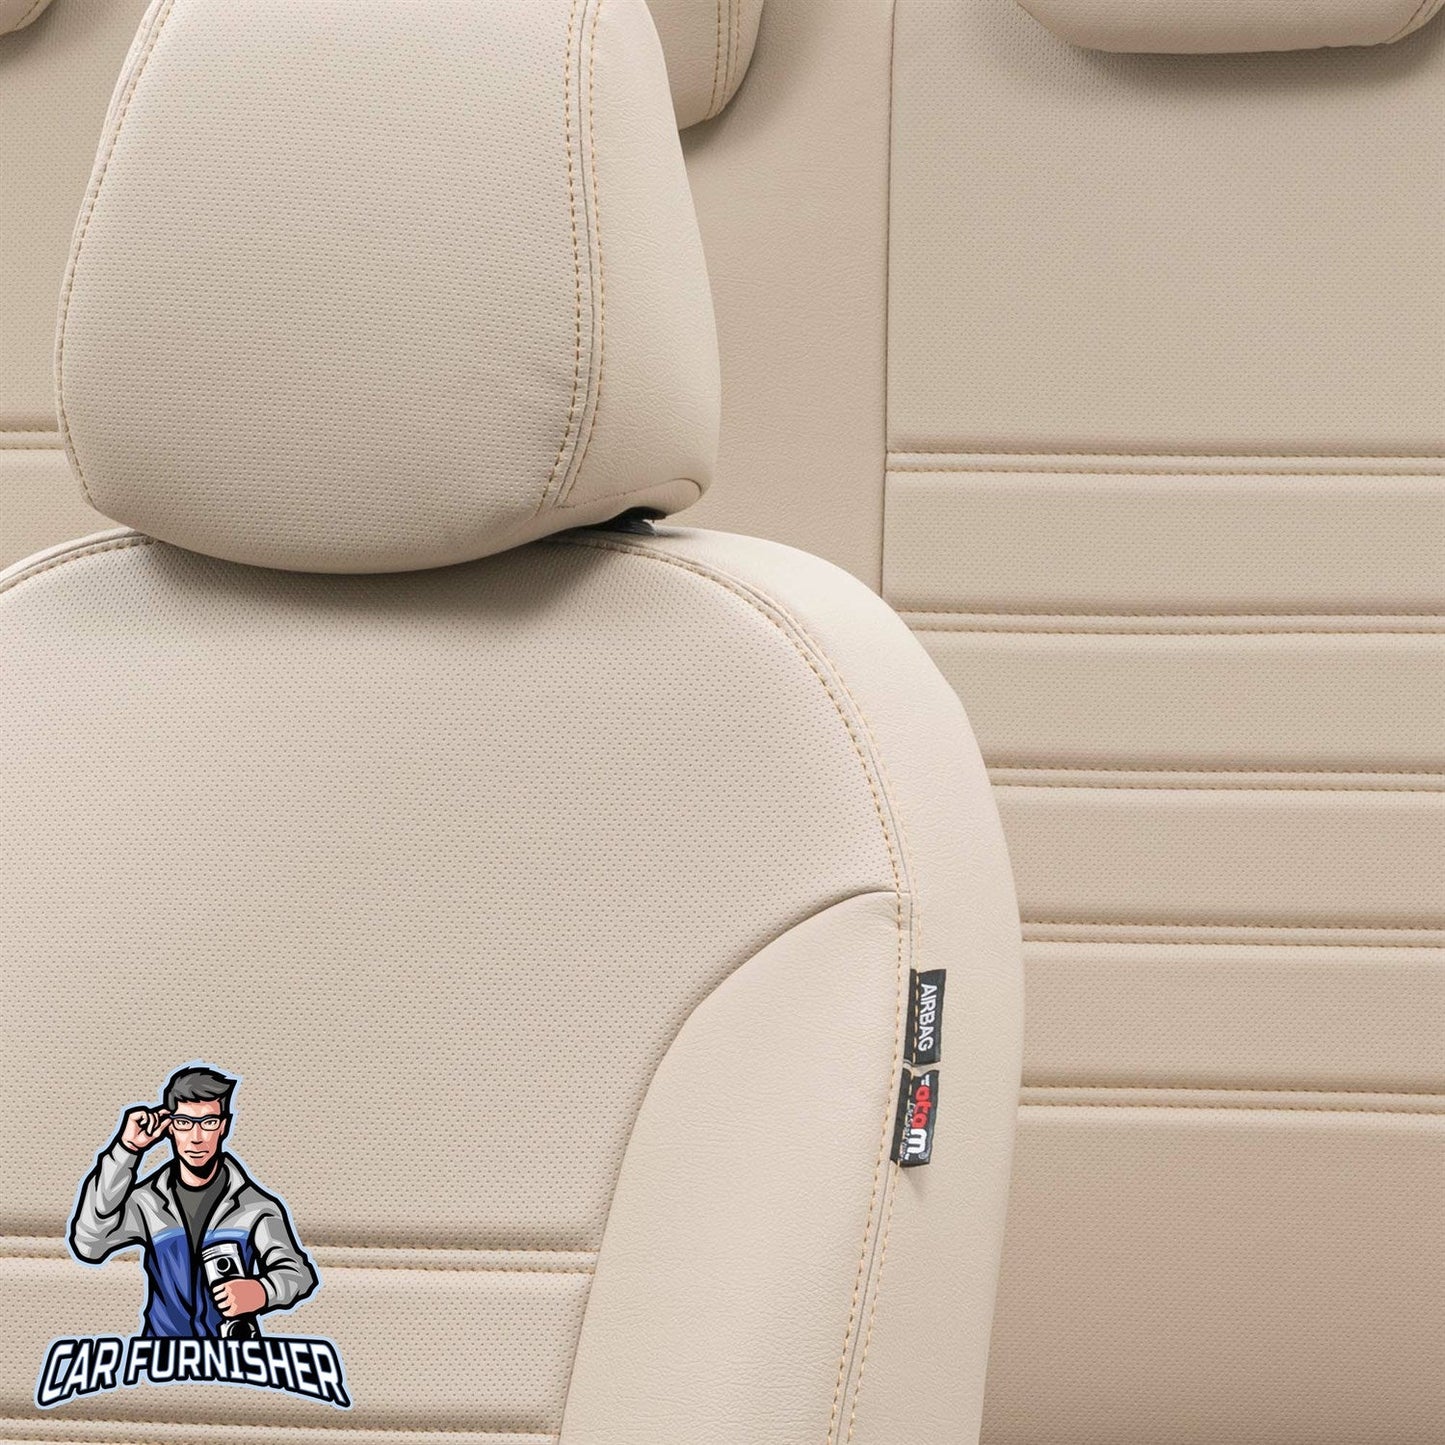 Man TGE Seat Covers Istanbul Leather Design Beige Leather